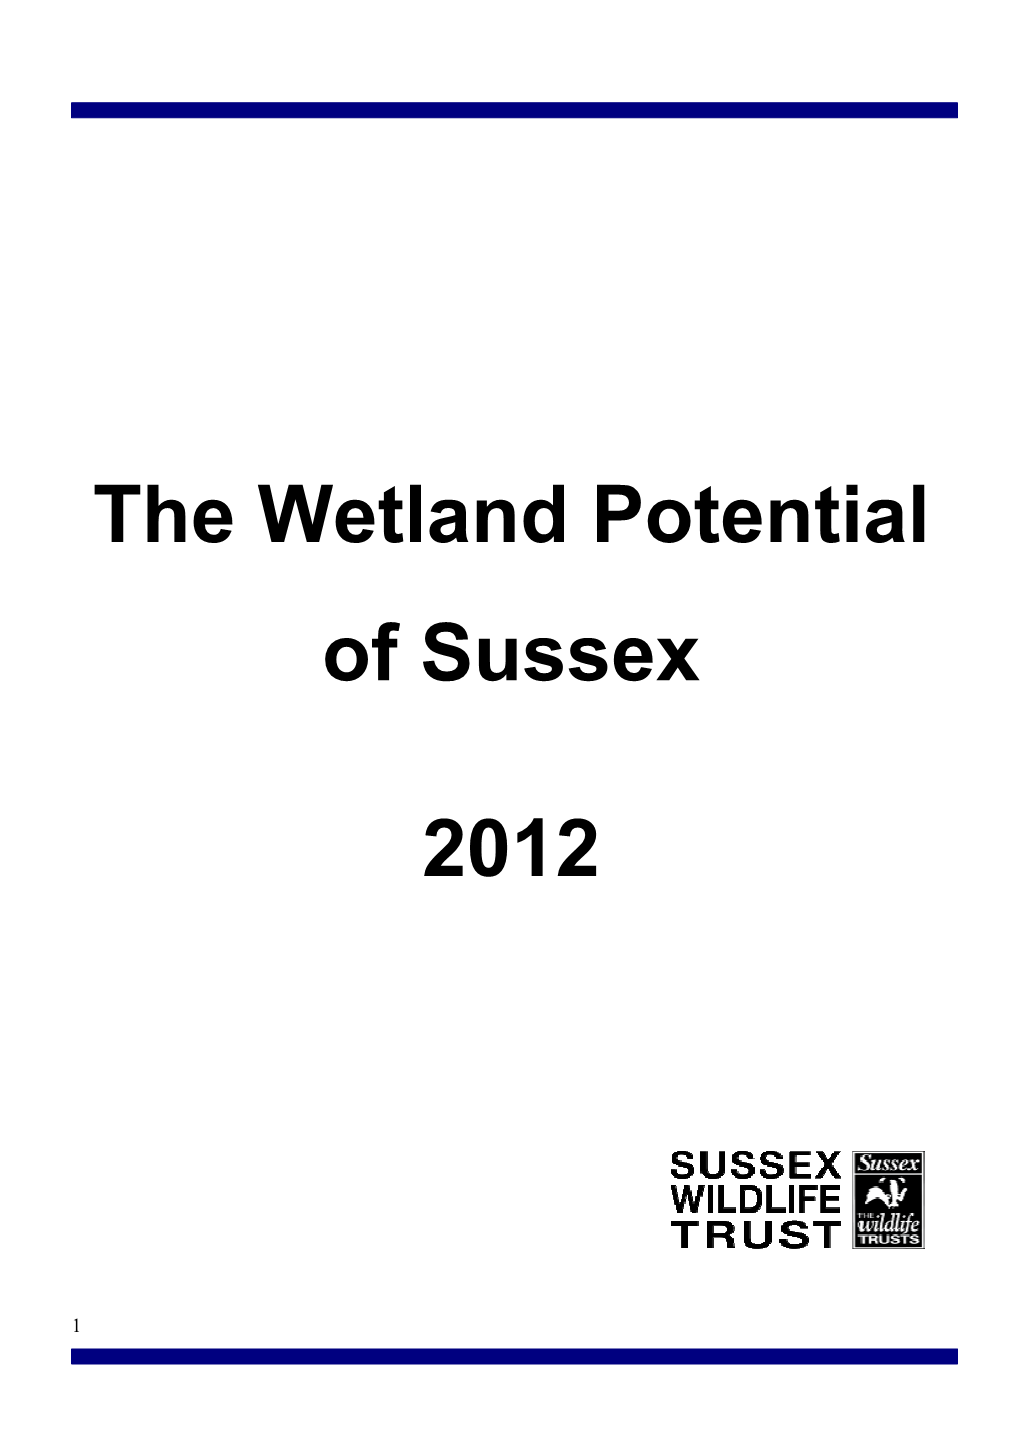 The Wetland Potential of Sussex